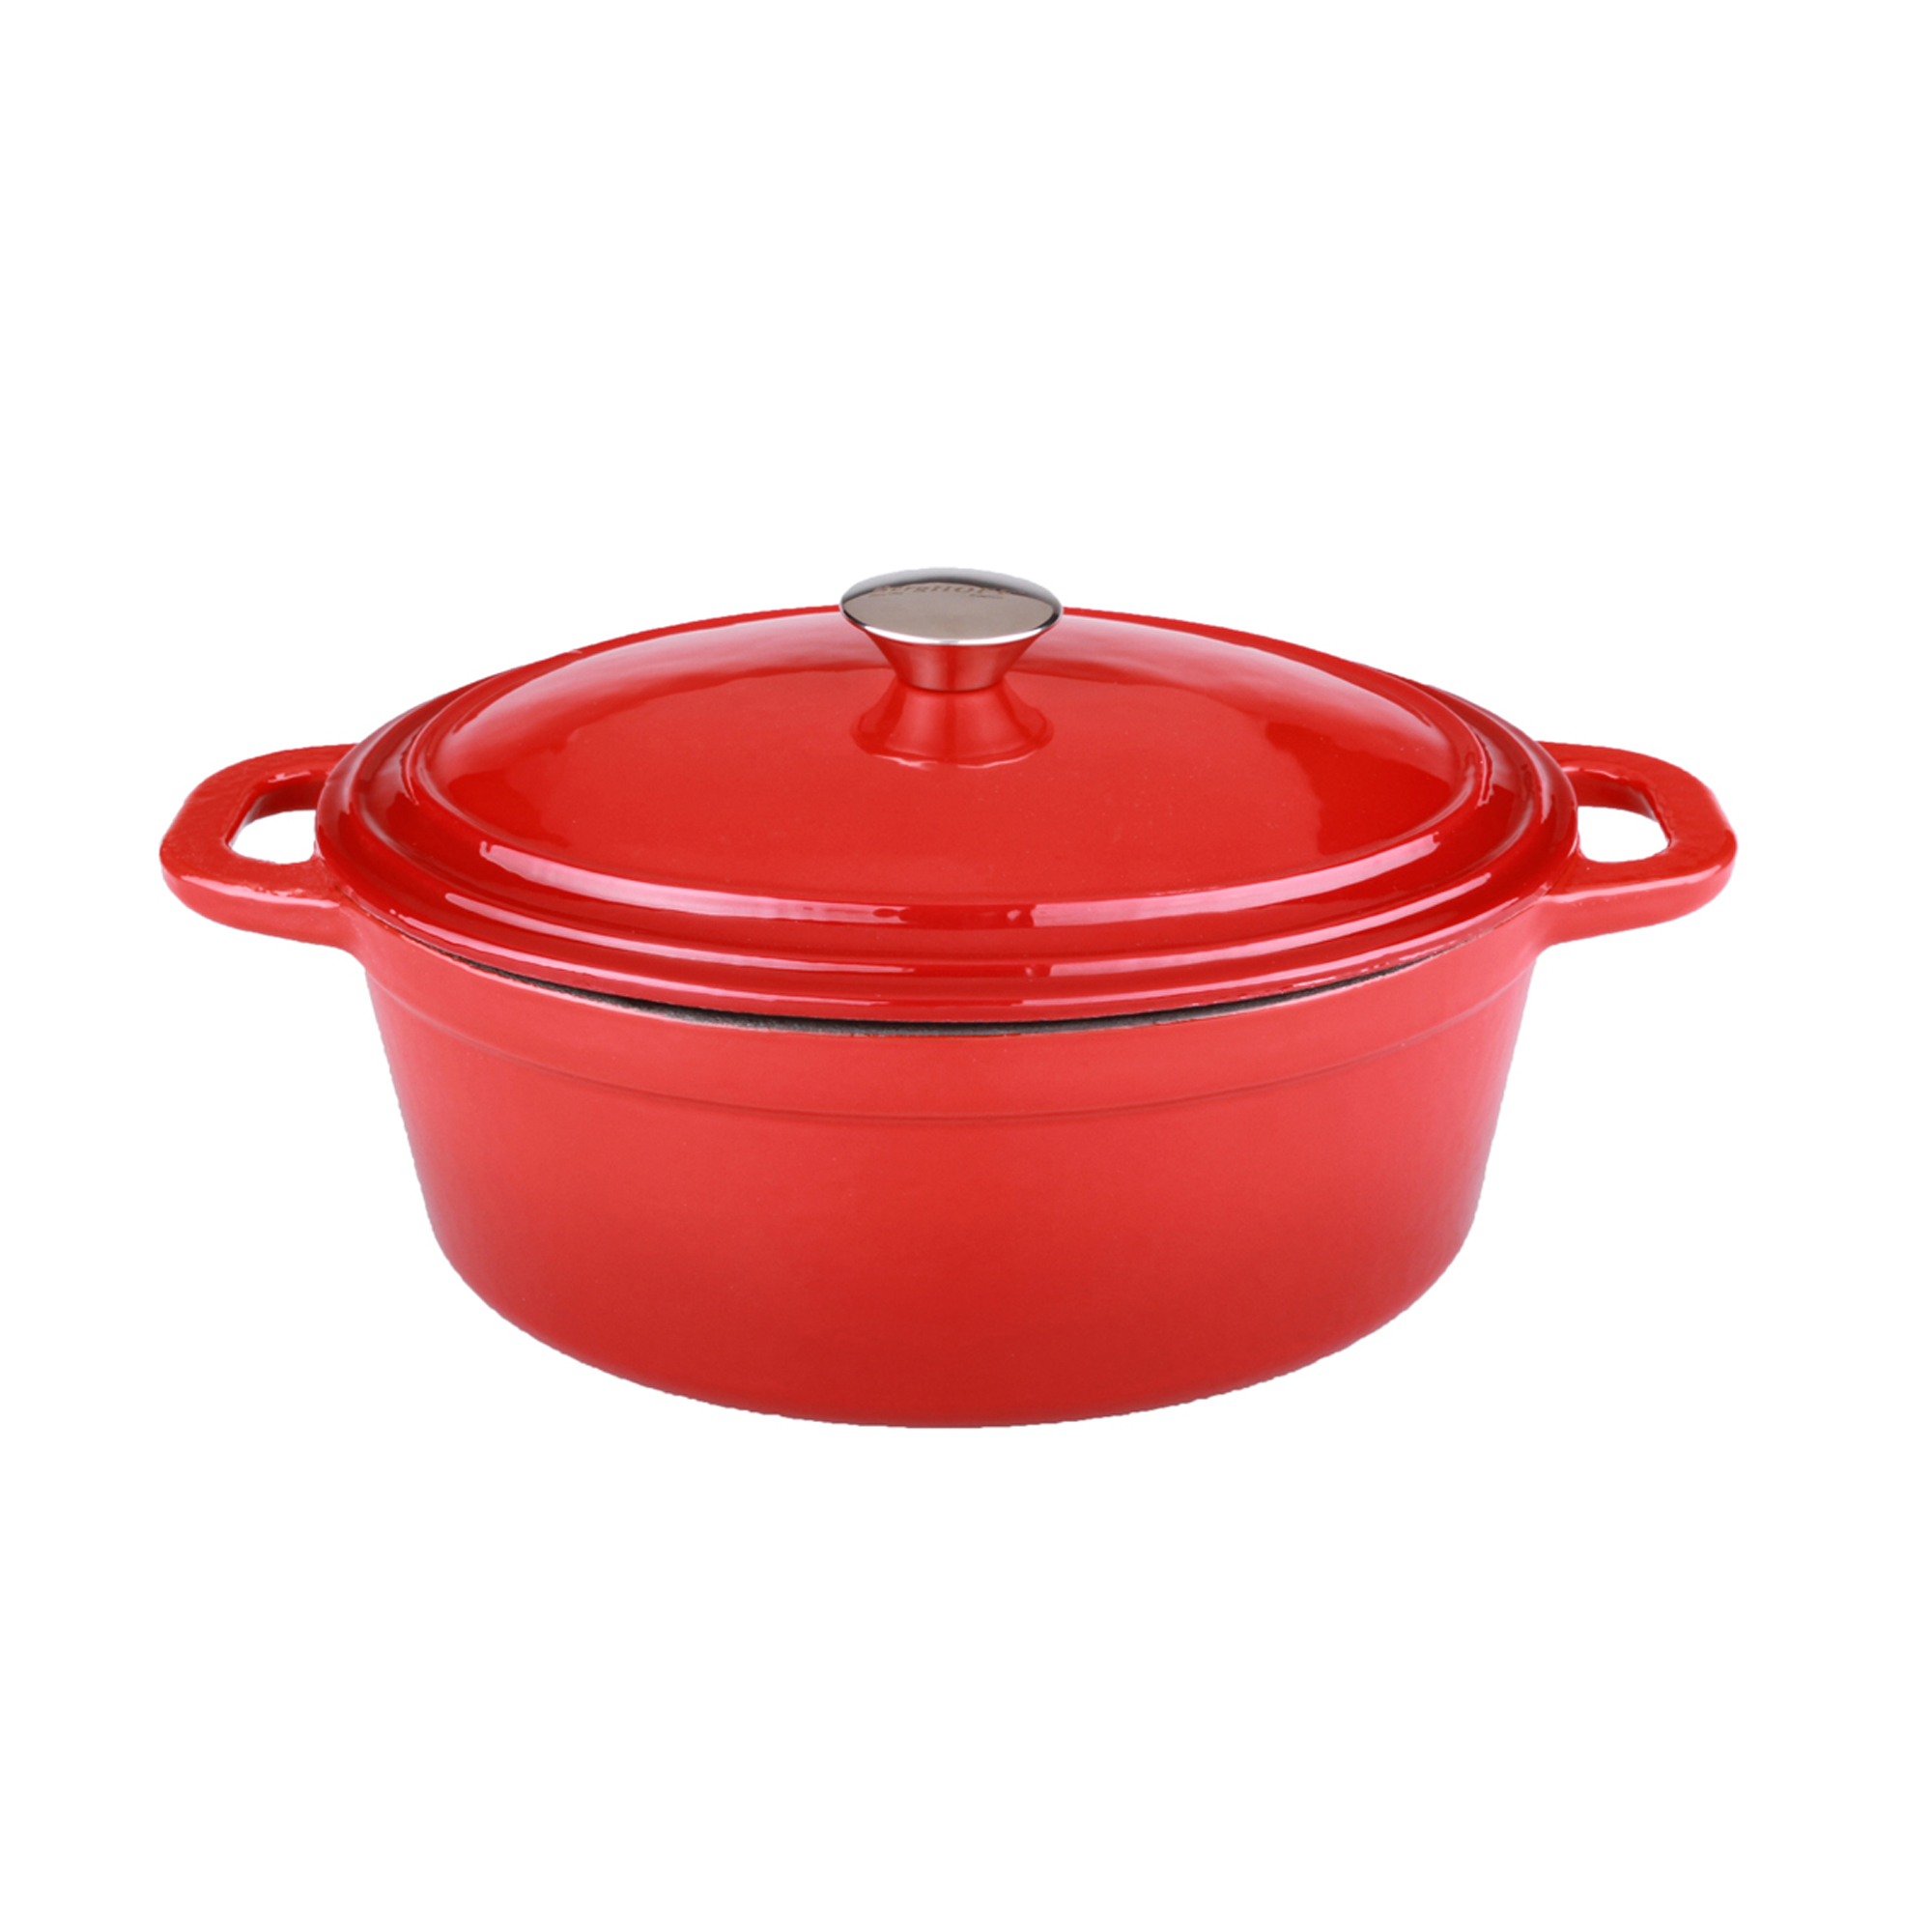 BergHOFF Neo 8qt Cast Iron Oval Covered Casserole Red